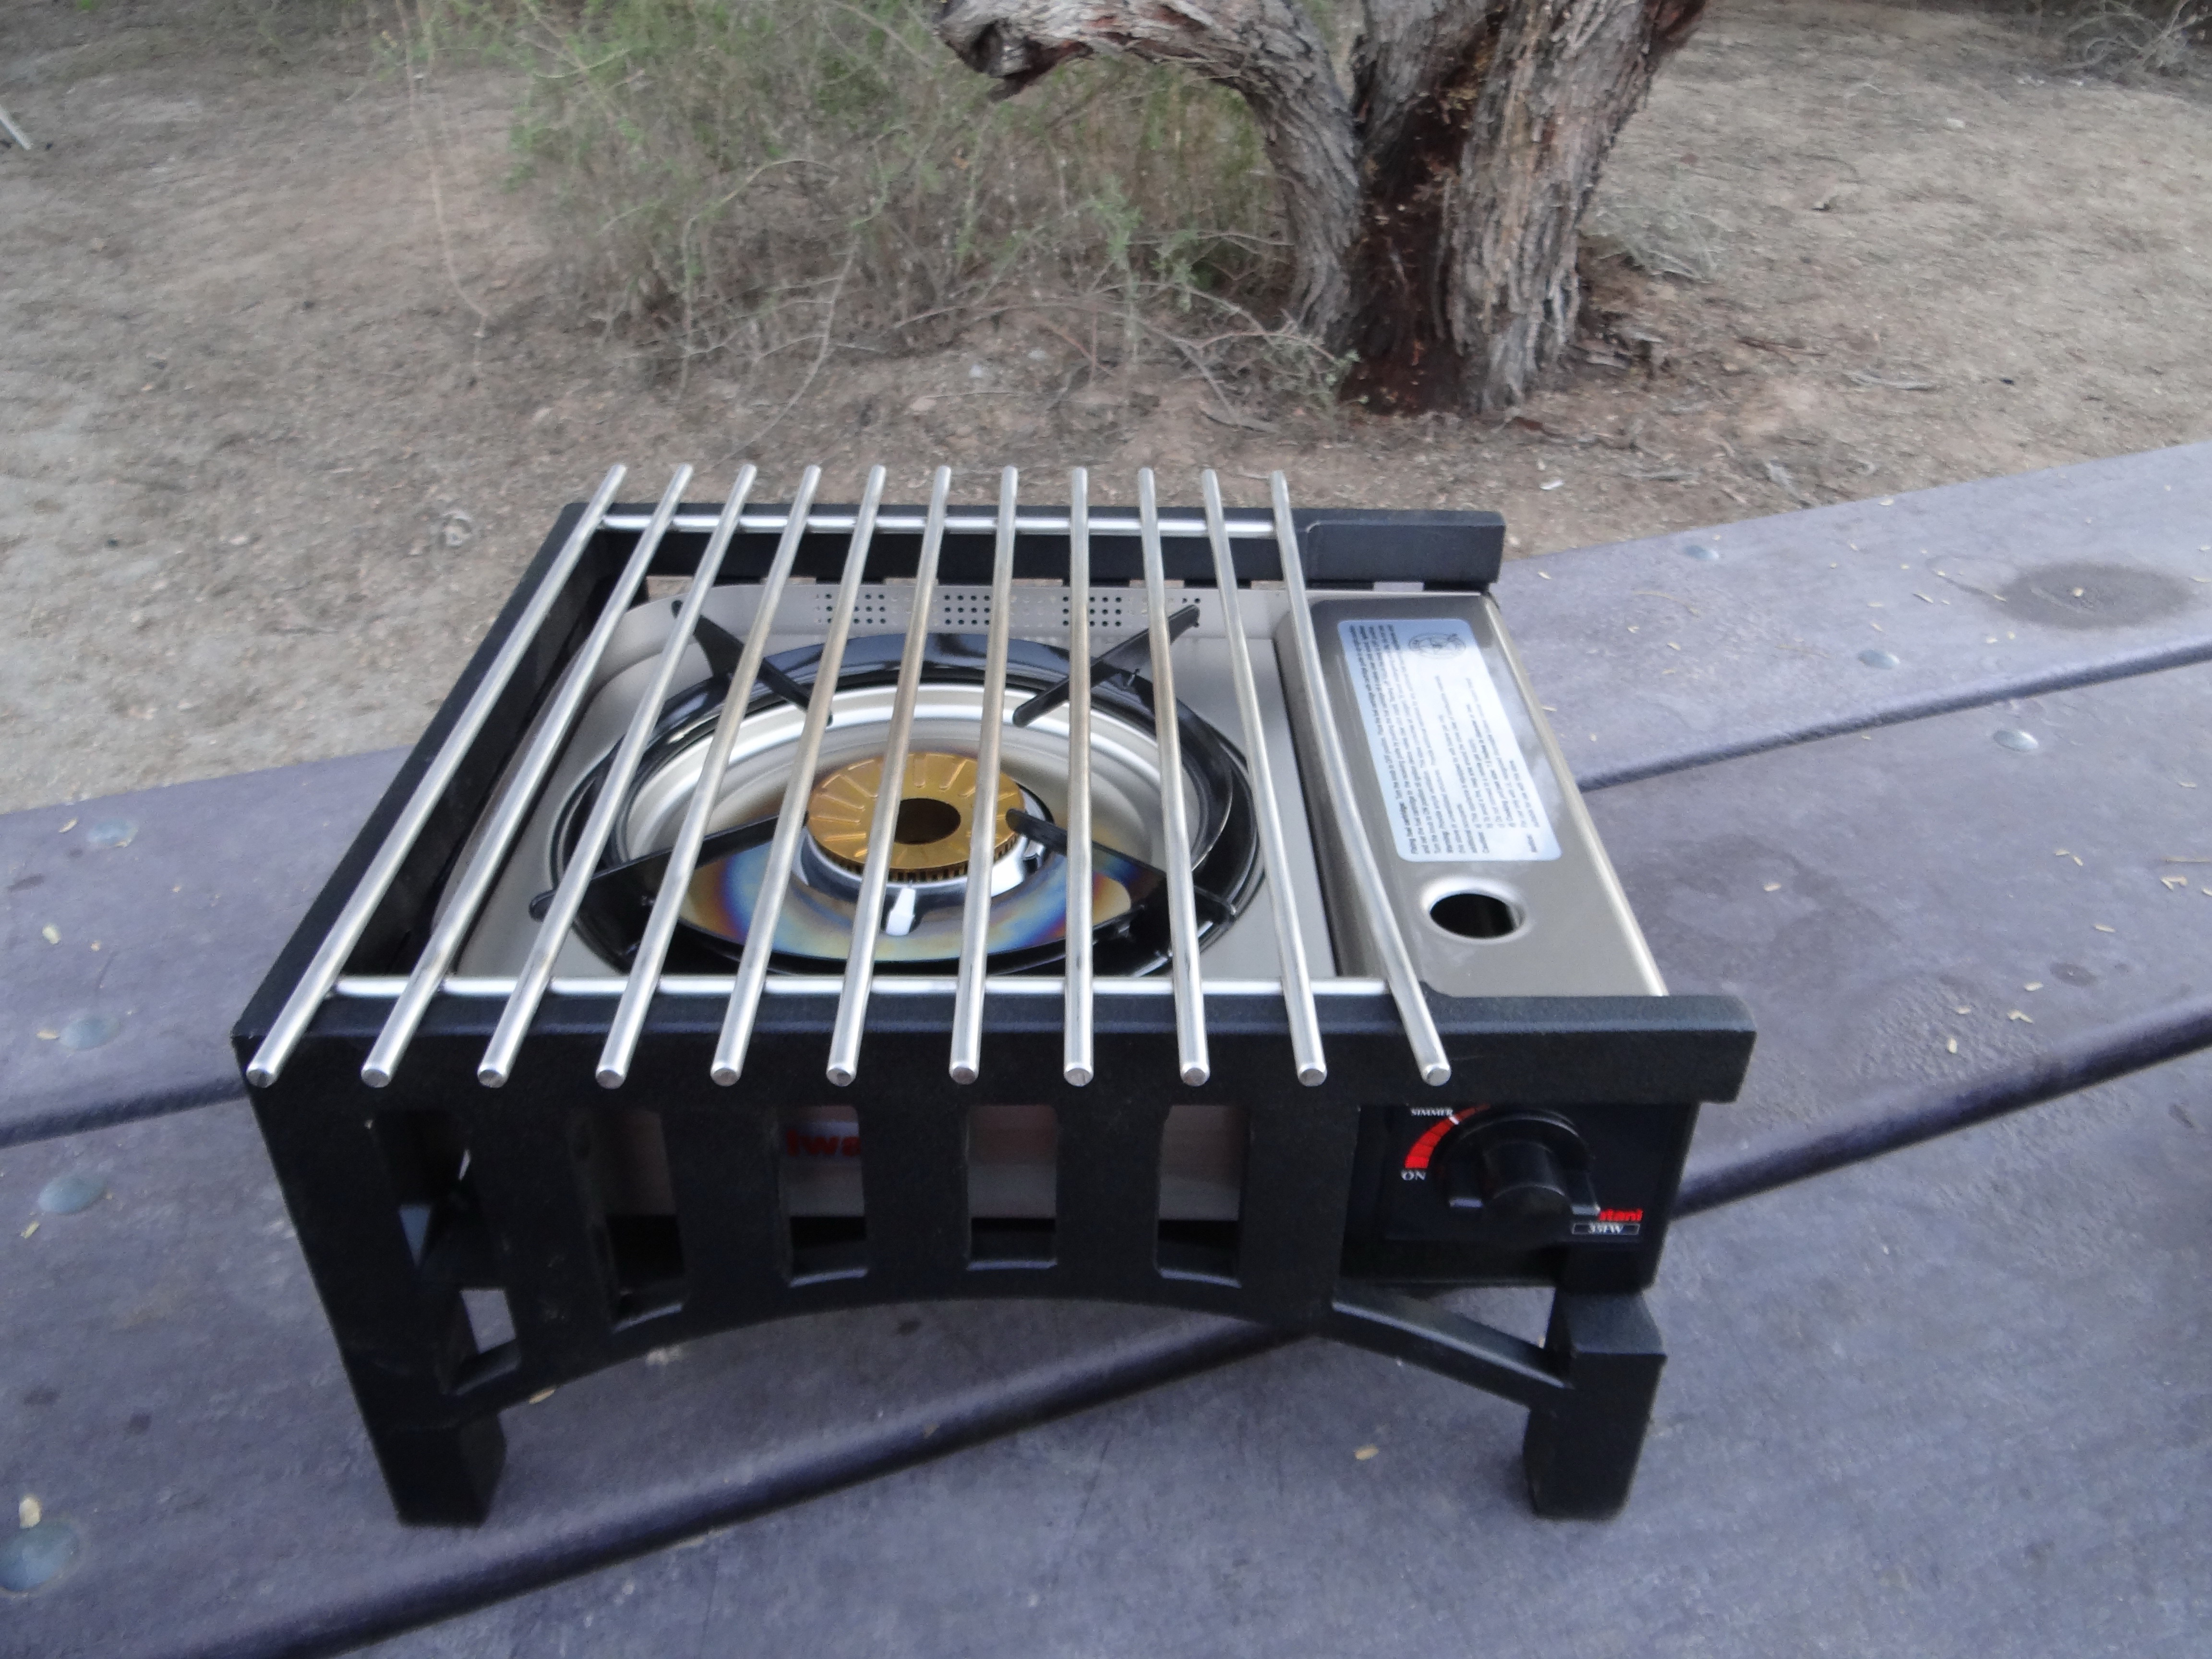 Iwatani stove and grill - Sportsmobile Forum